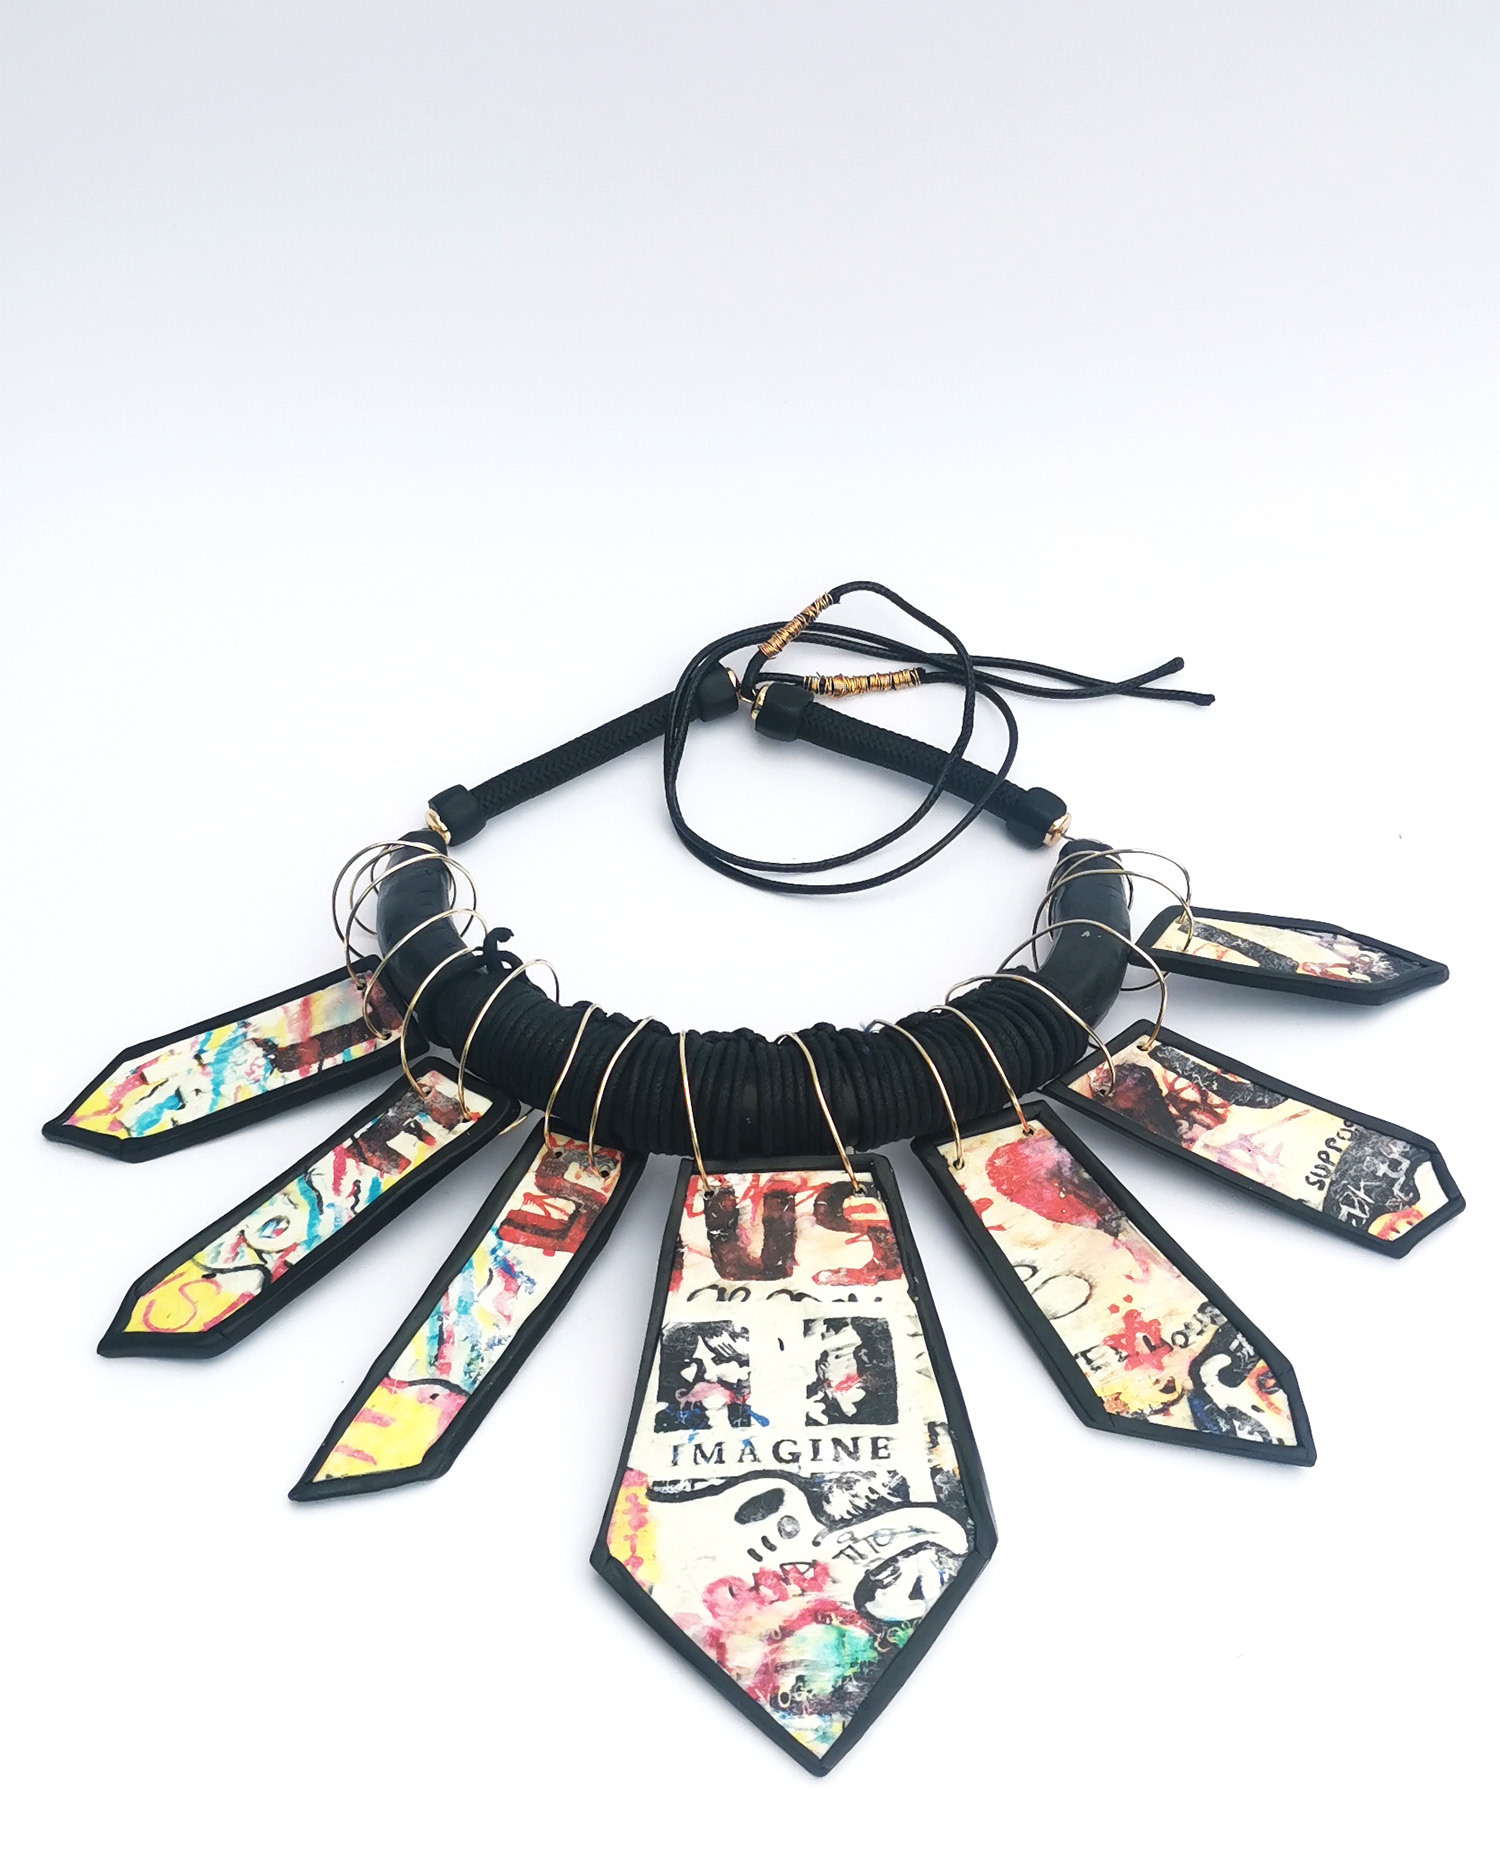 There is always hope – Polymer clay image transfer neck piece